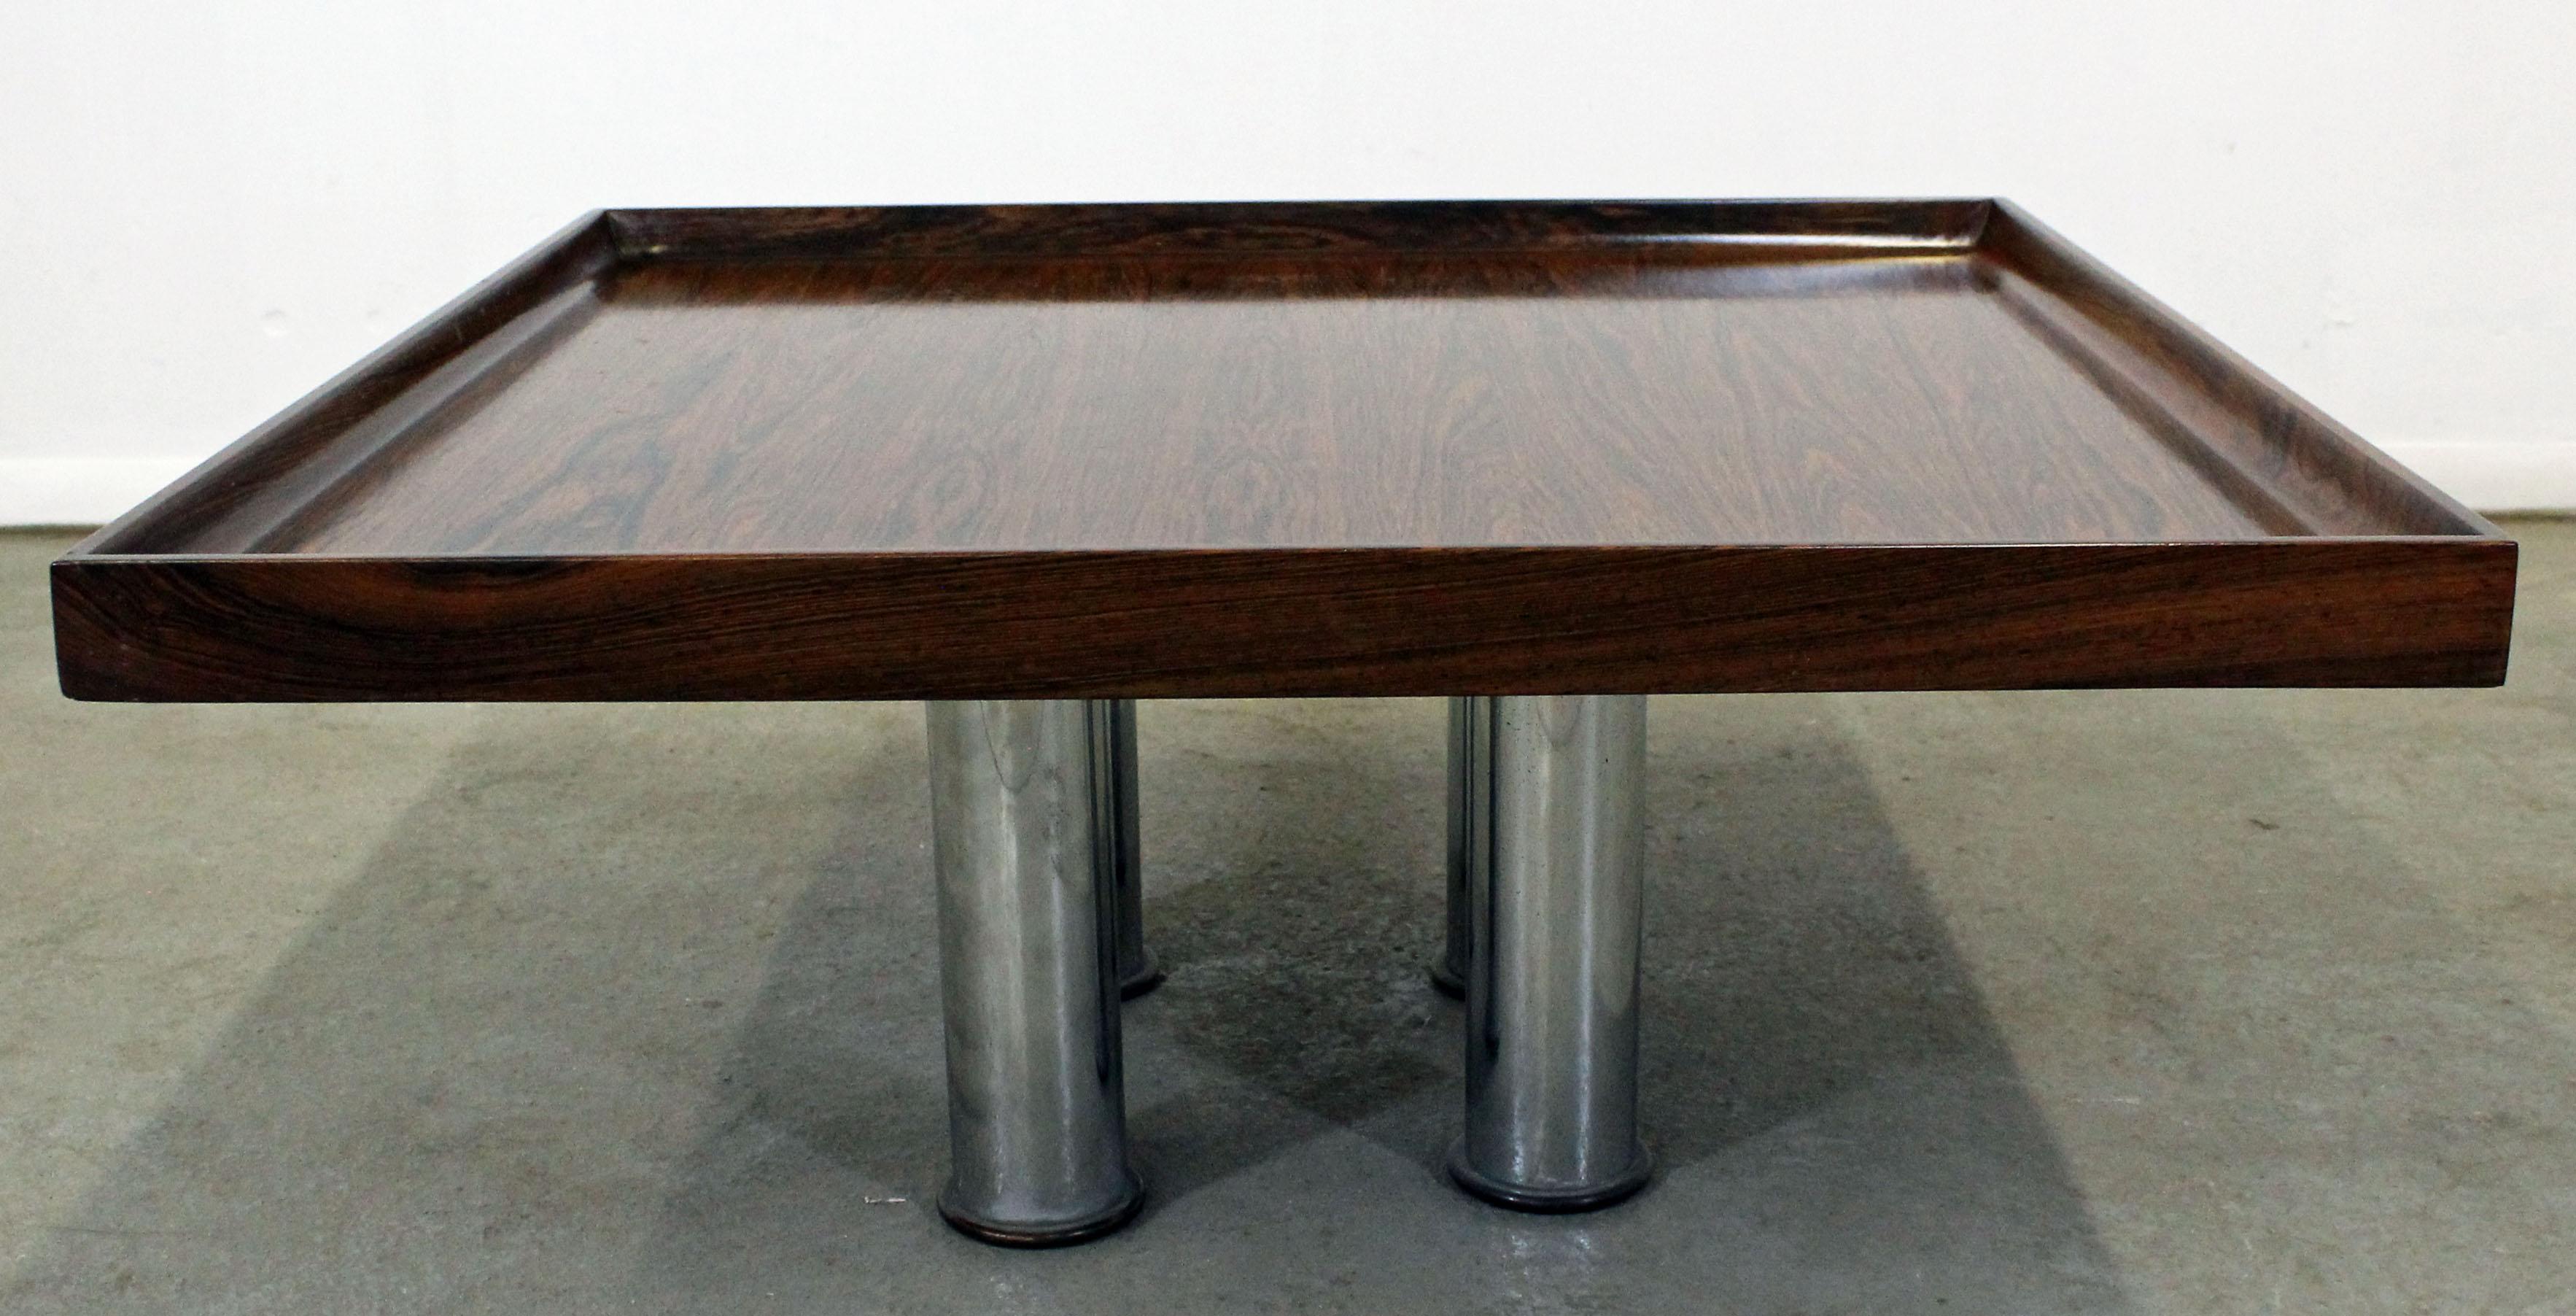 Offered is a Mid-Century Modern rosewood coffee or end table by Knoll. Features a square top and four chrome legs. In excellent condition its age, shows some slight wear (patina on chrome, minor surface wear-see photos). It is unsigned. A great